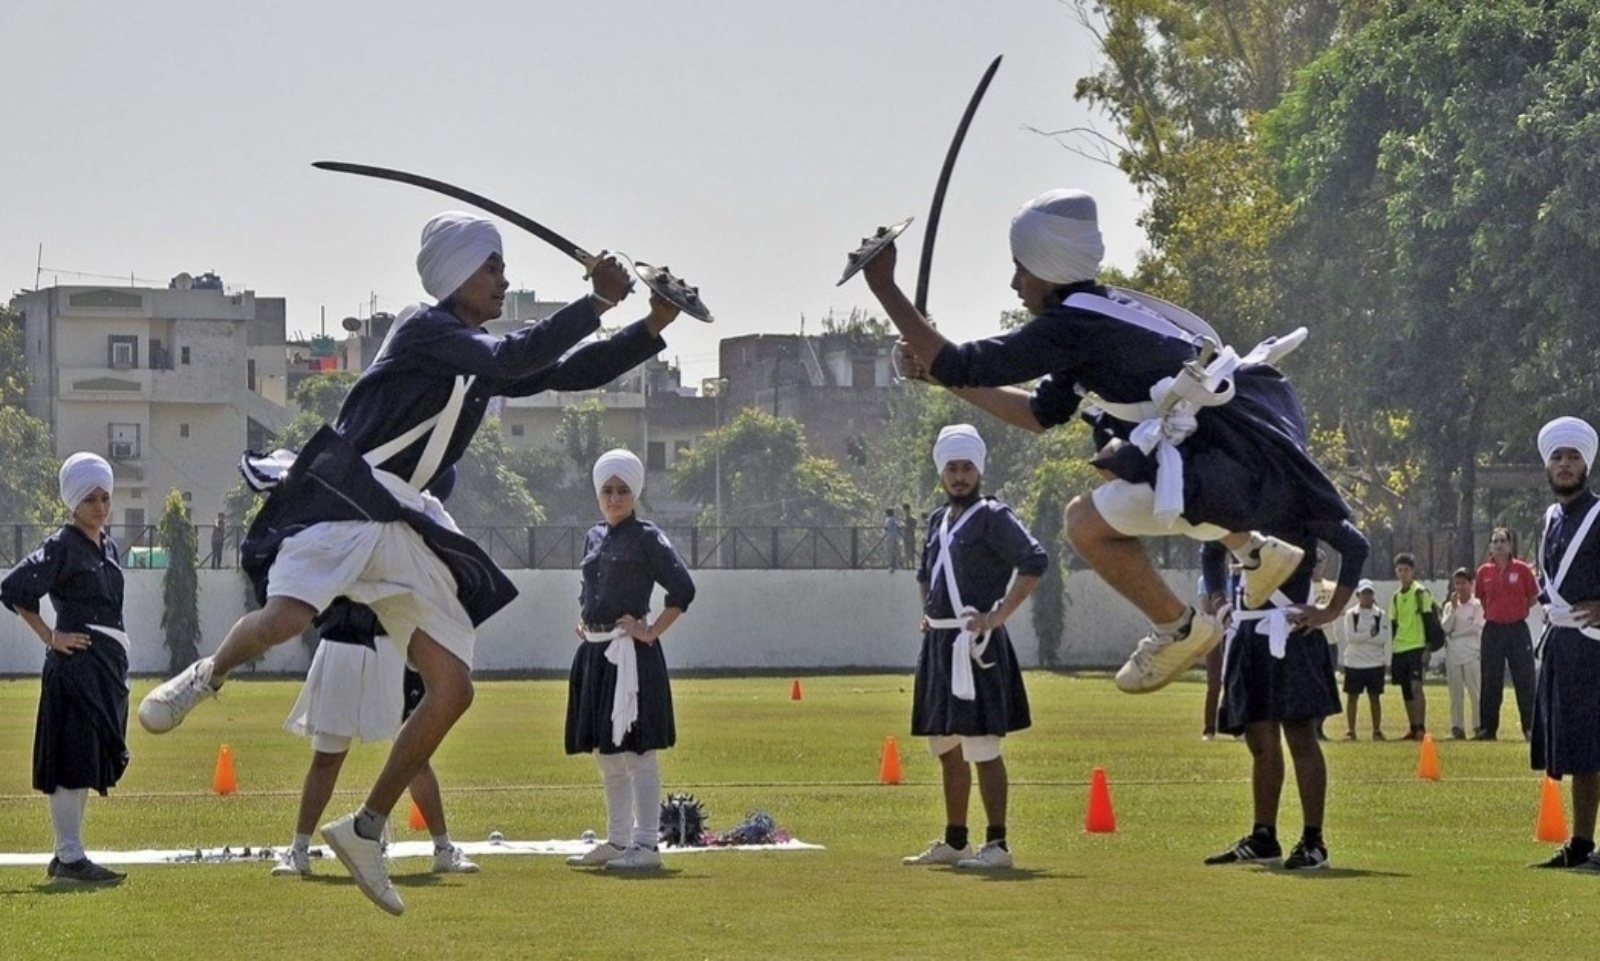 Gatka, a Punjab-based martial art, to feature in 2023 National Games